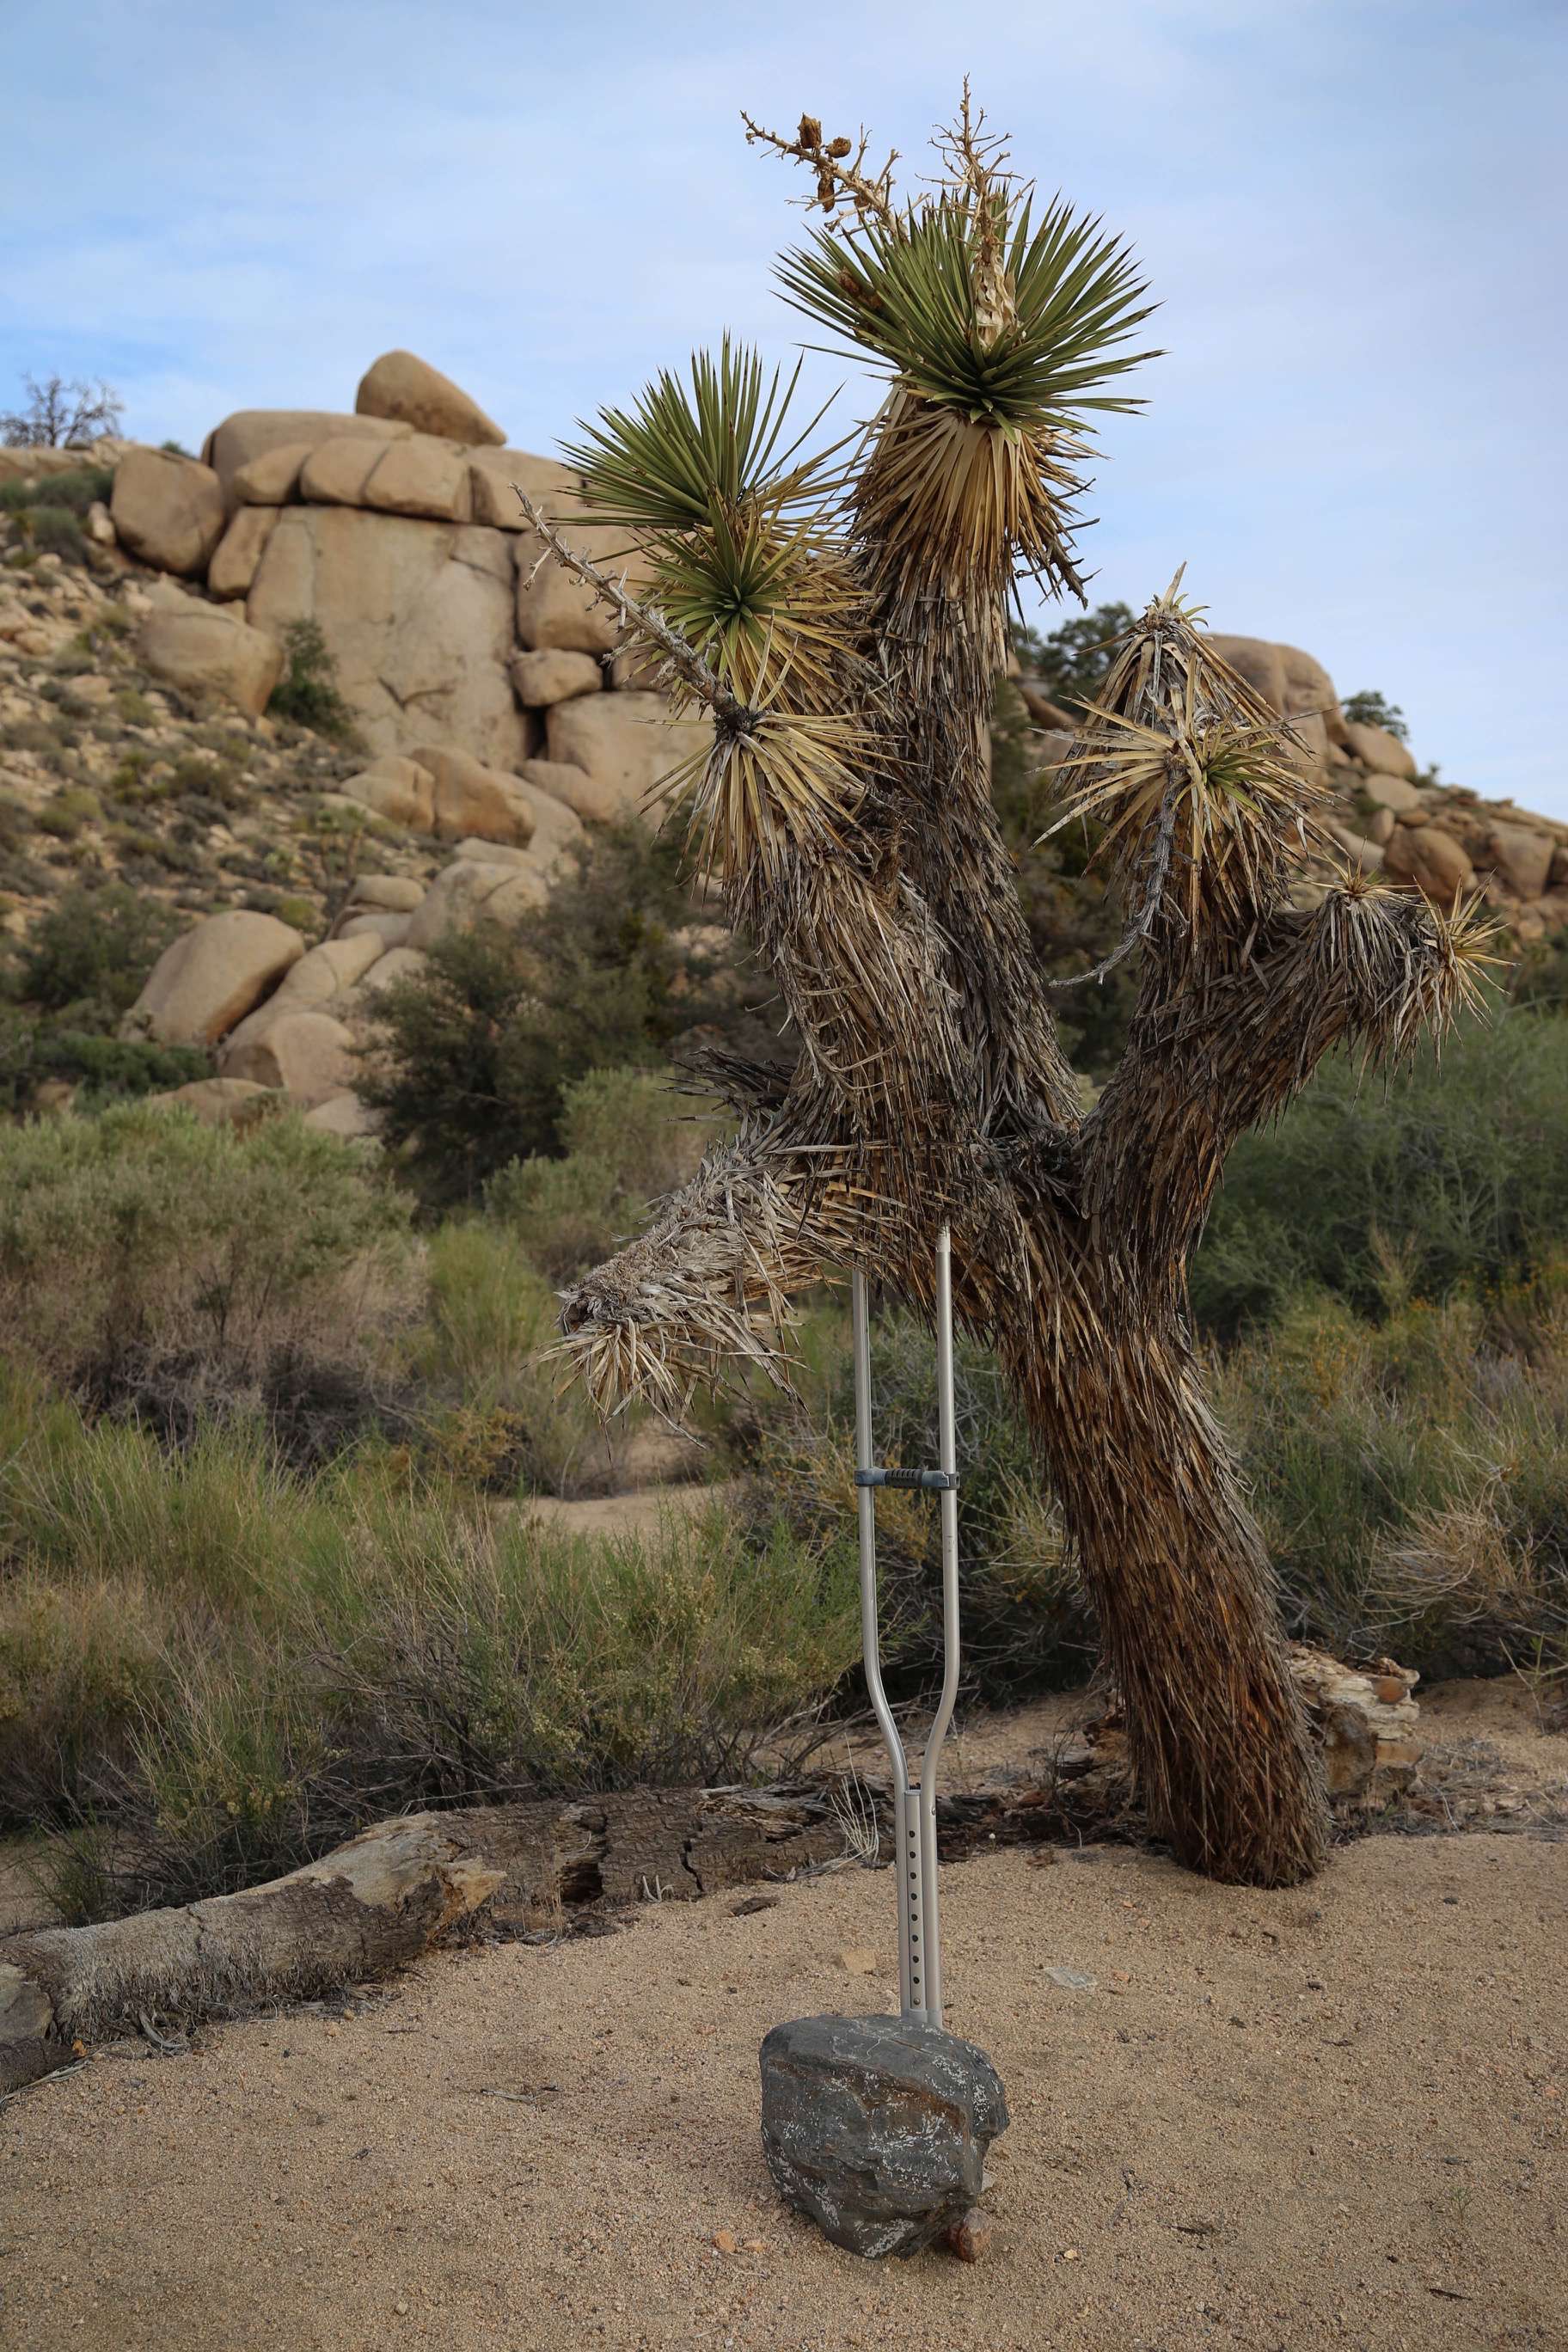 With a little help this Joshua tree still stands.